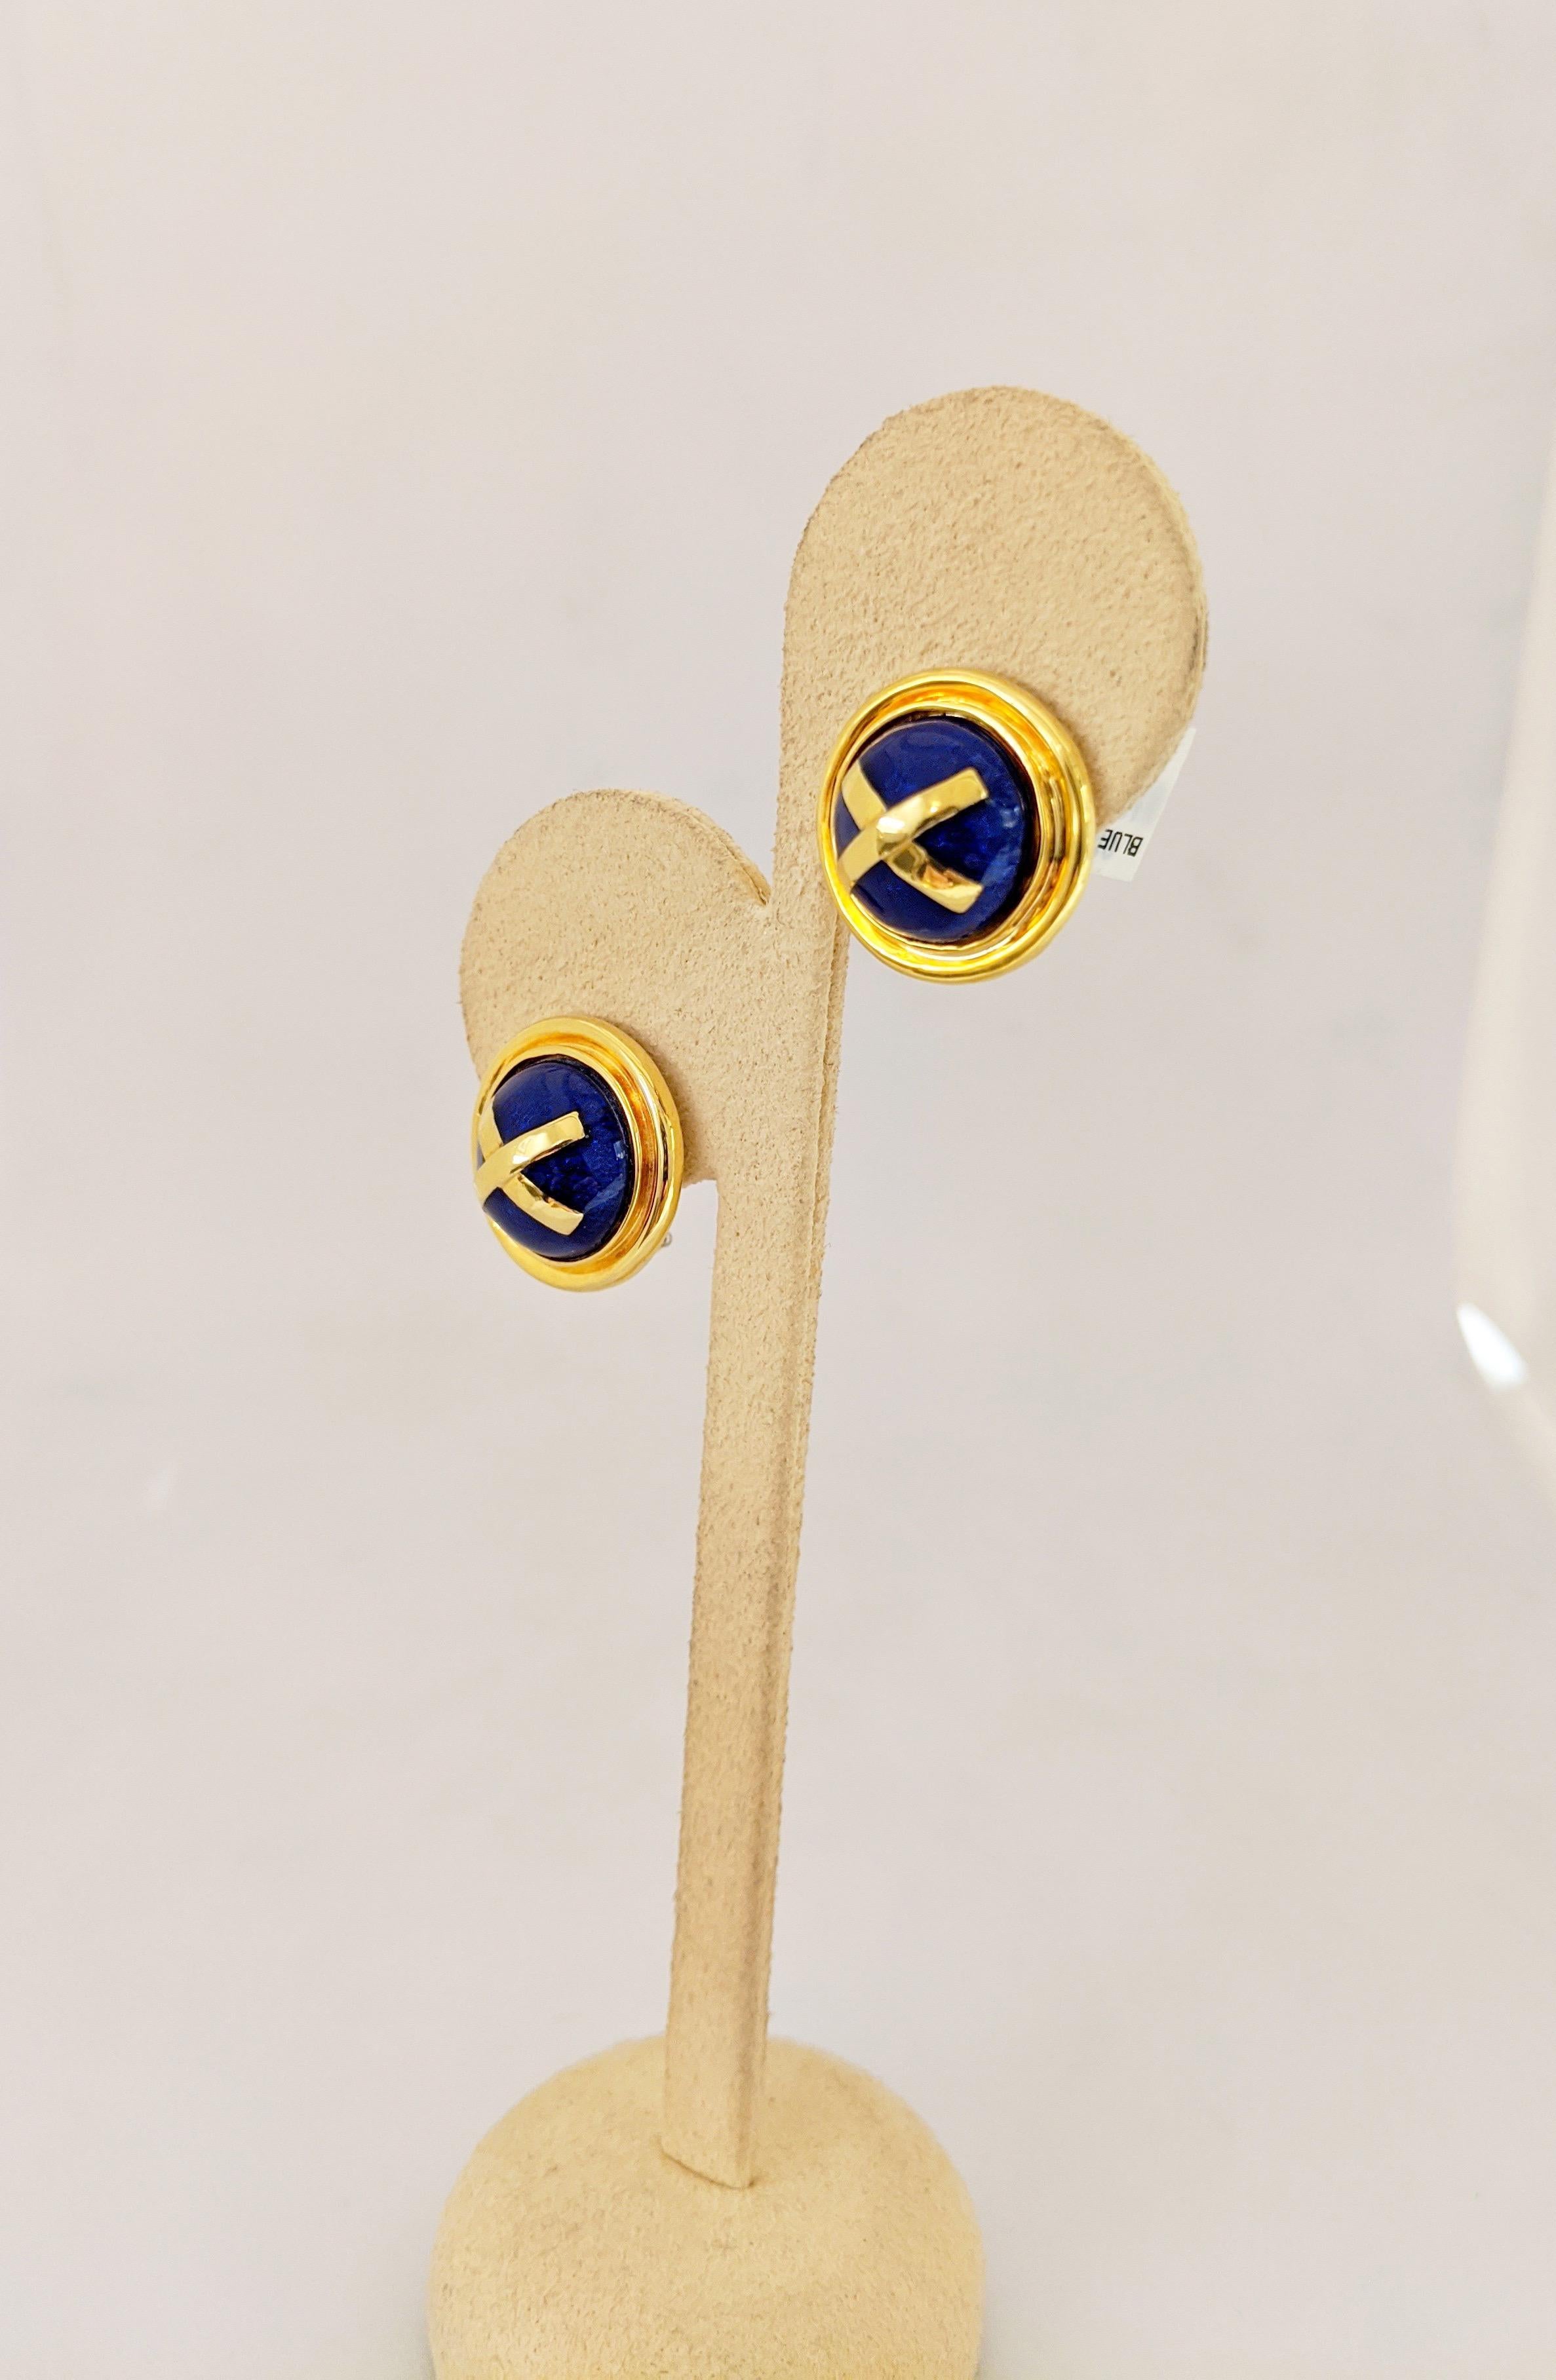 Cute as a Button!!
Cellini exclusive earrings
18 karat yellow gold button earrings with blue enamel and a yellow gold 